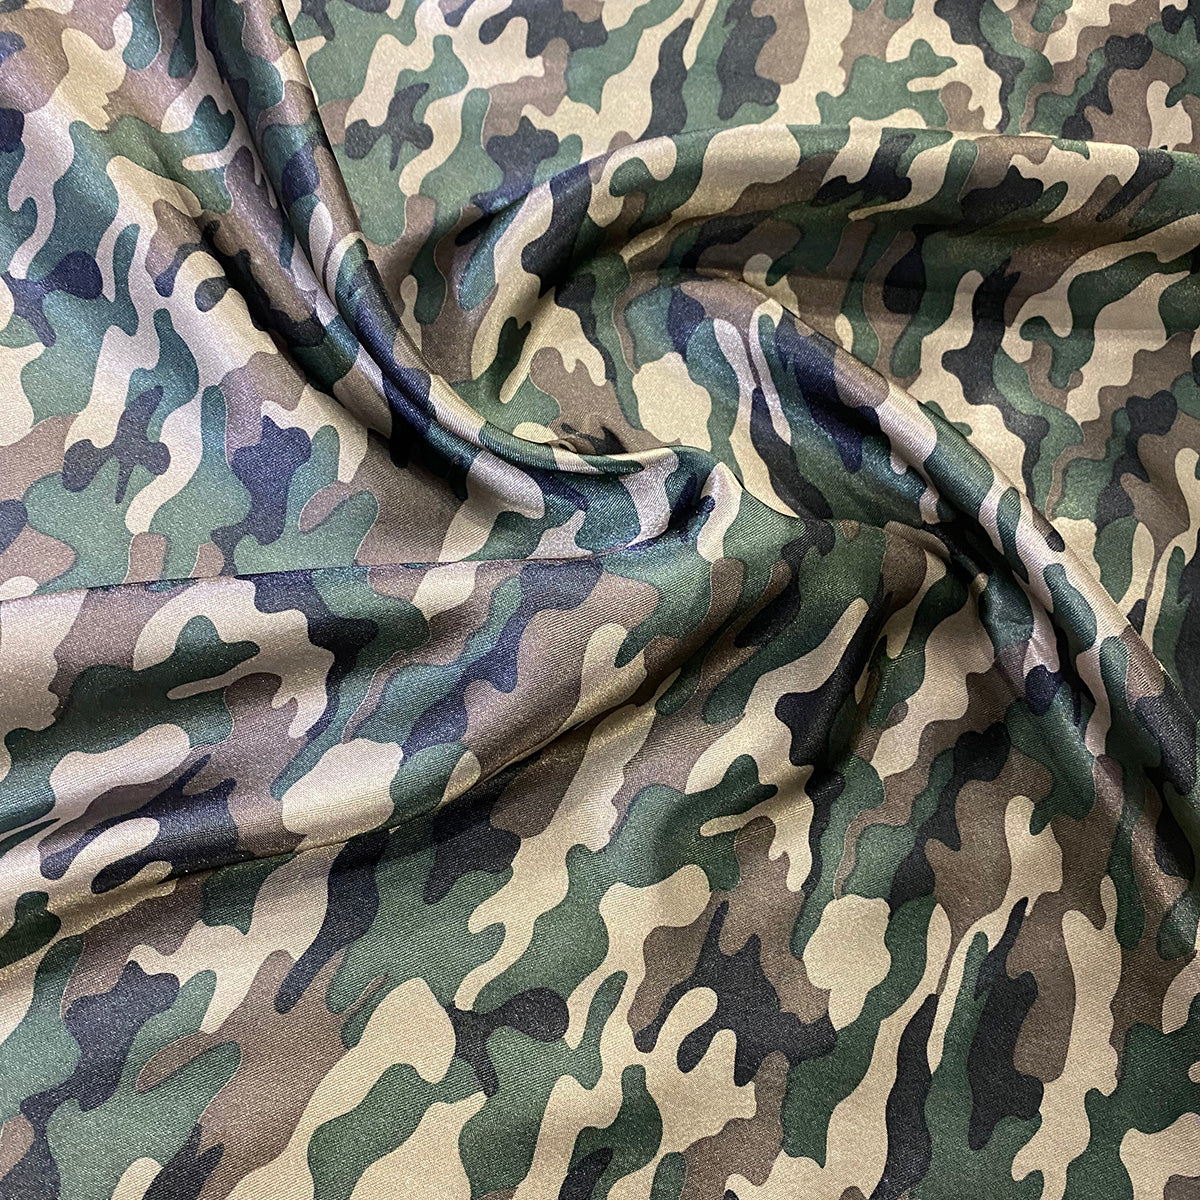 100% Cotton Fabric Grey and Black Colour Army/Camouflage Print 58 Wide  Sold by The Yard : : Home